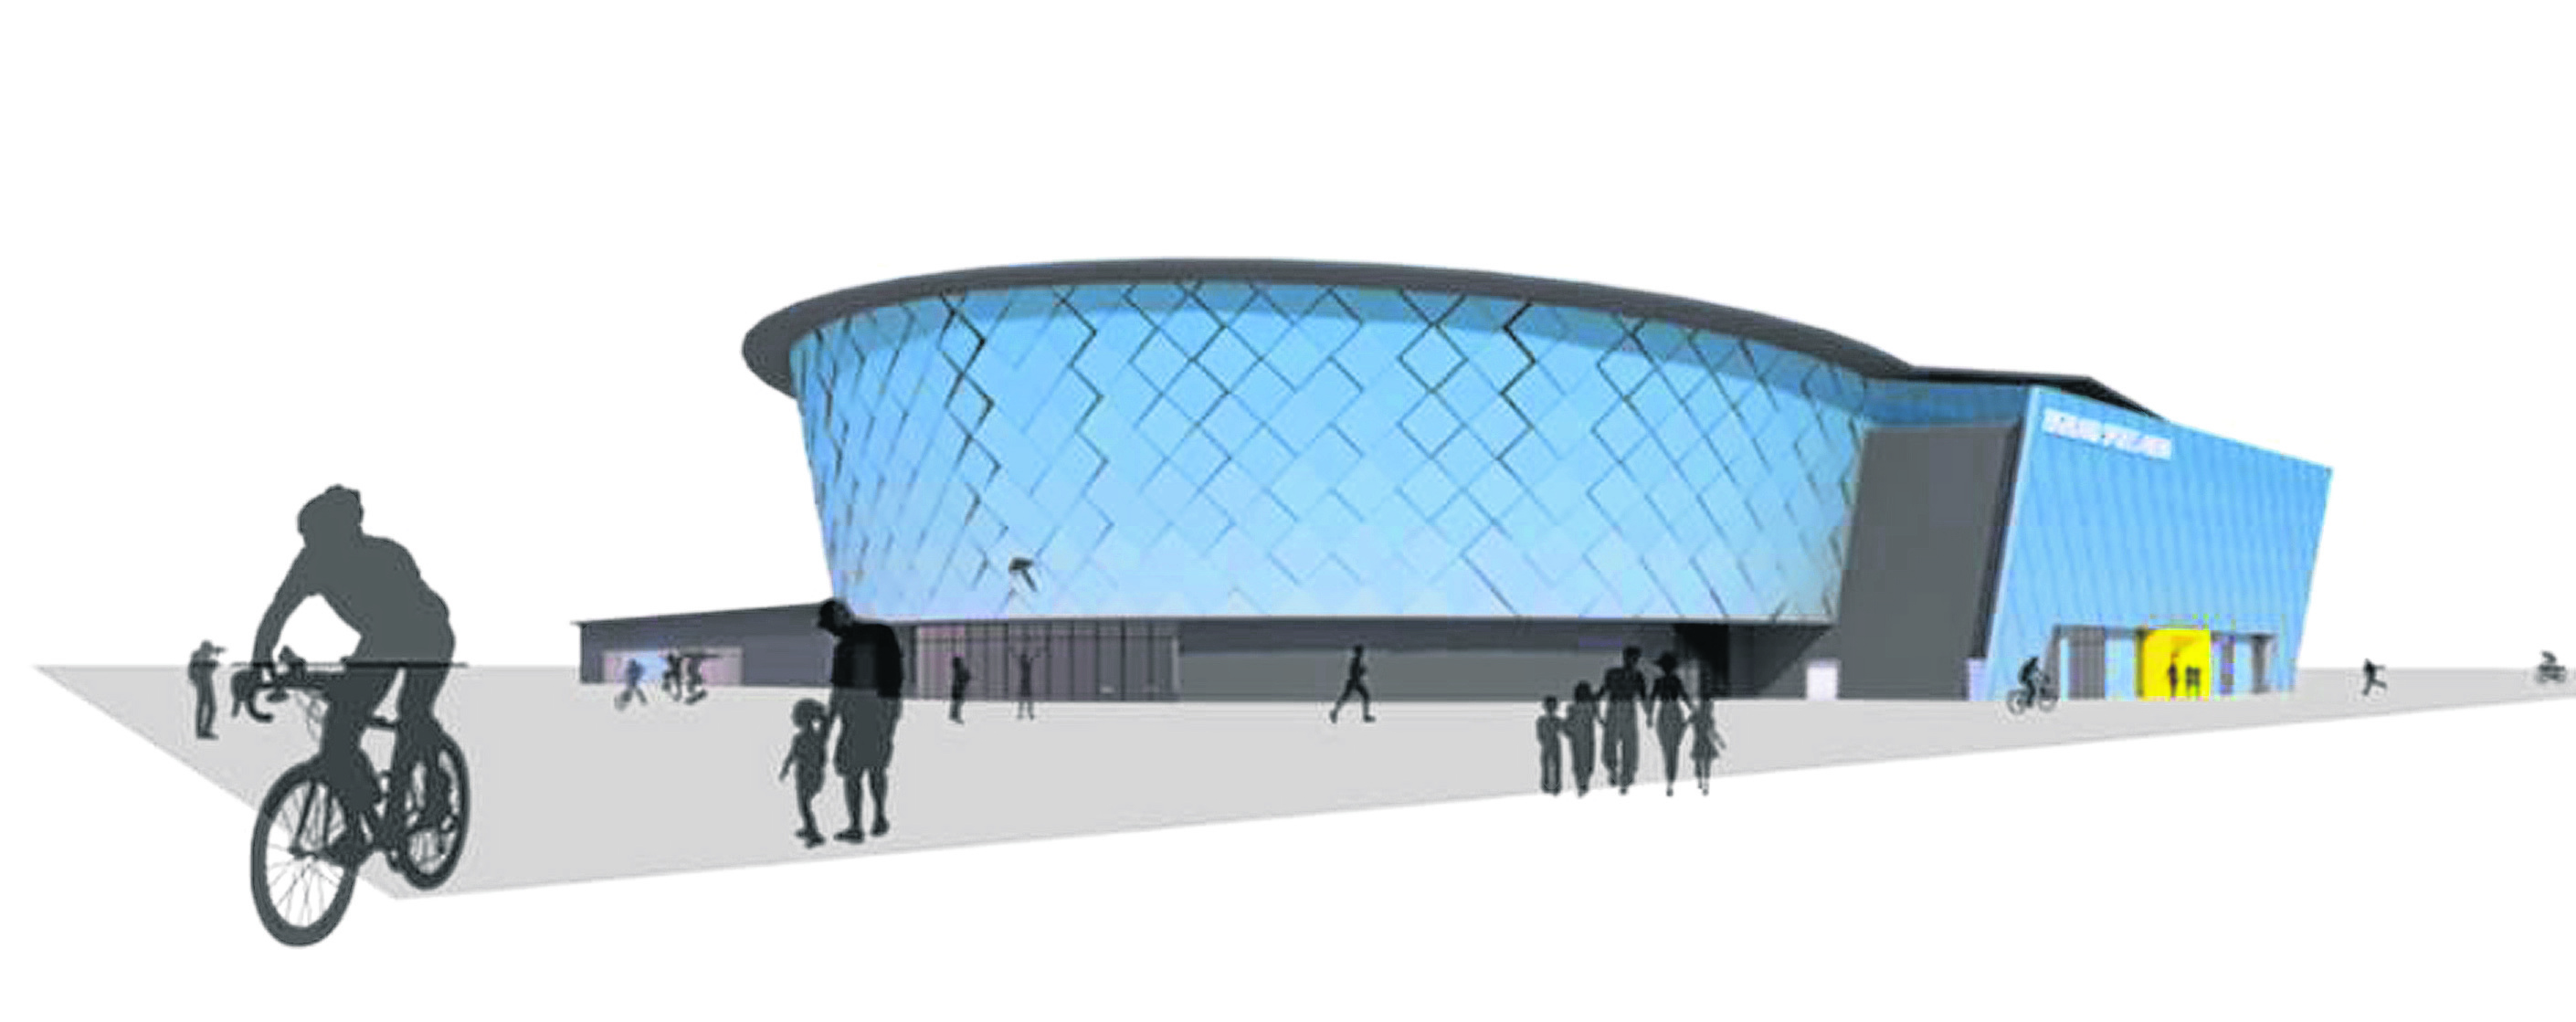 Artist impression of what the new Inverness Arena might look like.